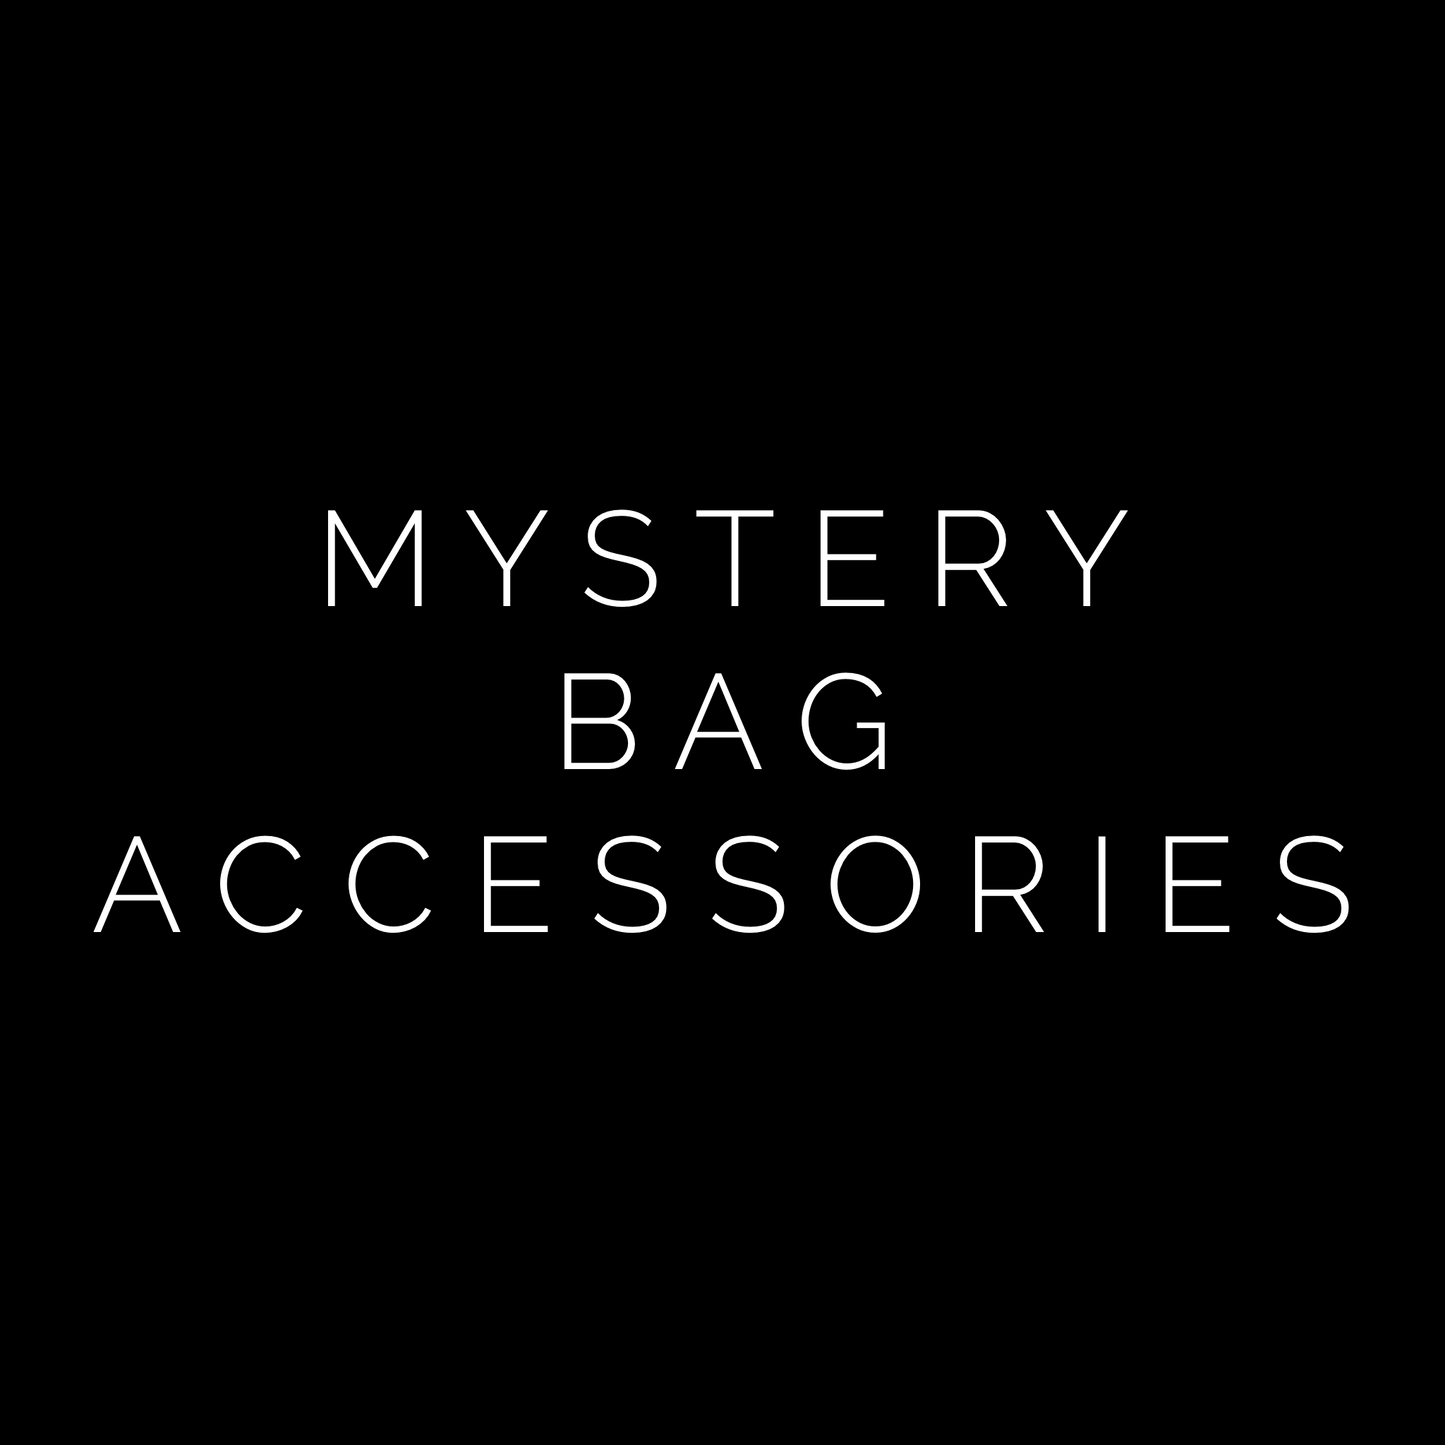 5 Mystery Accessories